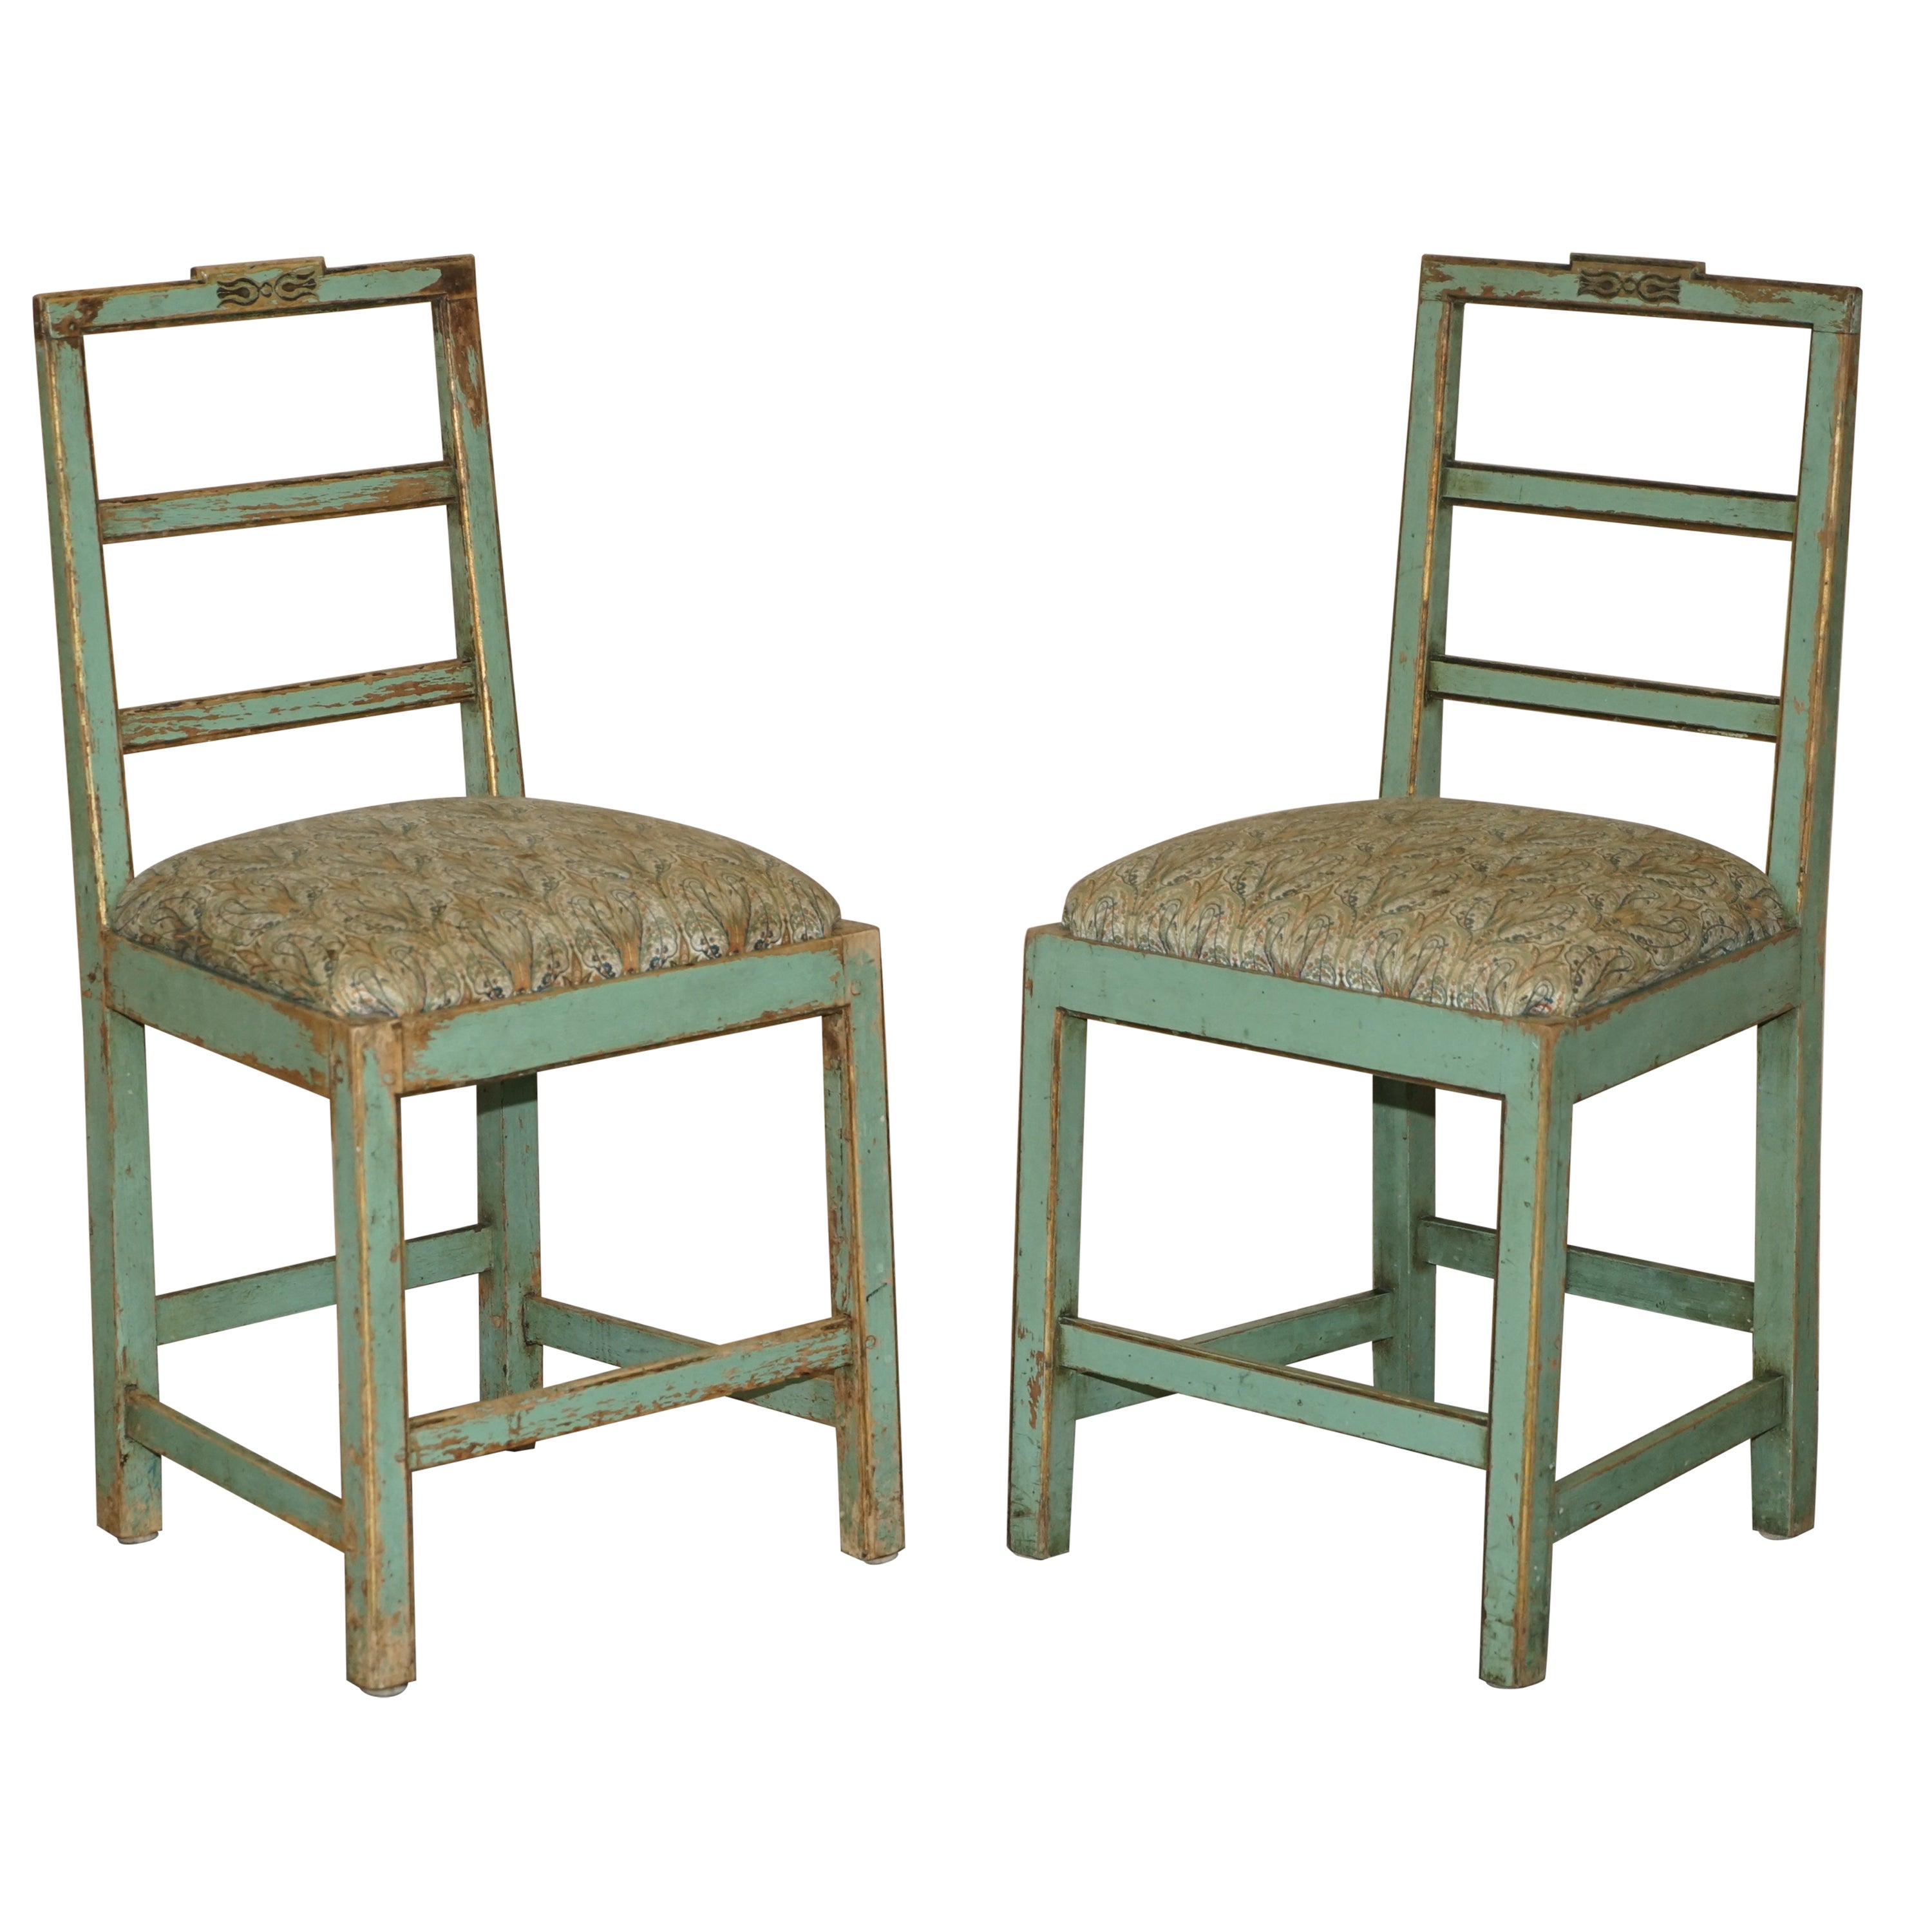 Pair of Antique Original Paint French Country Chairs Inc Liberty's London Fabric For Sale